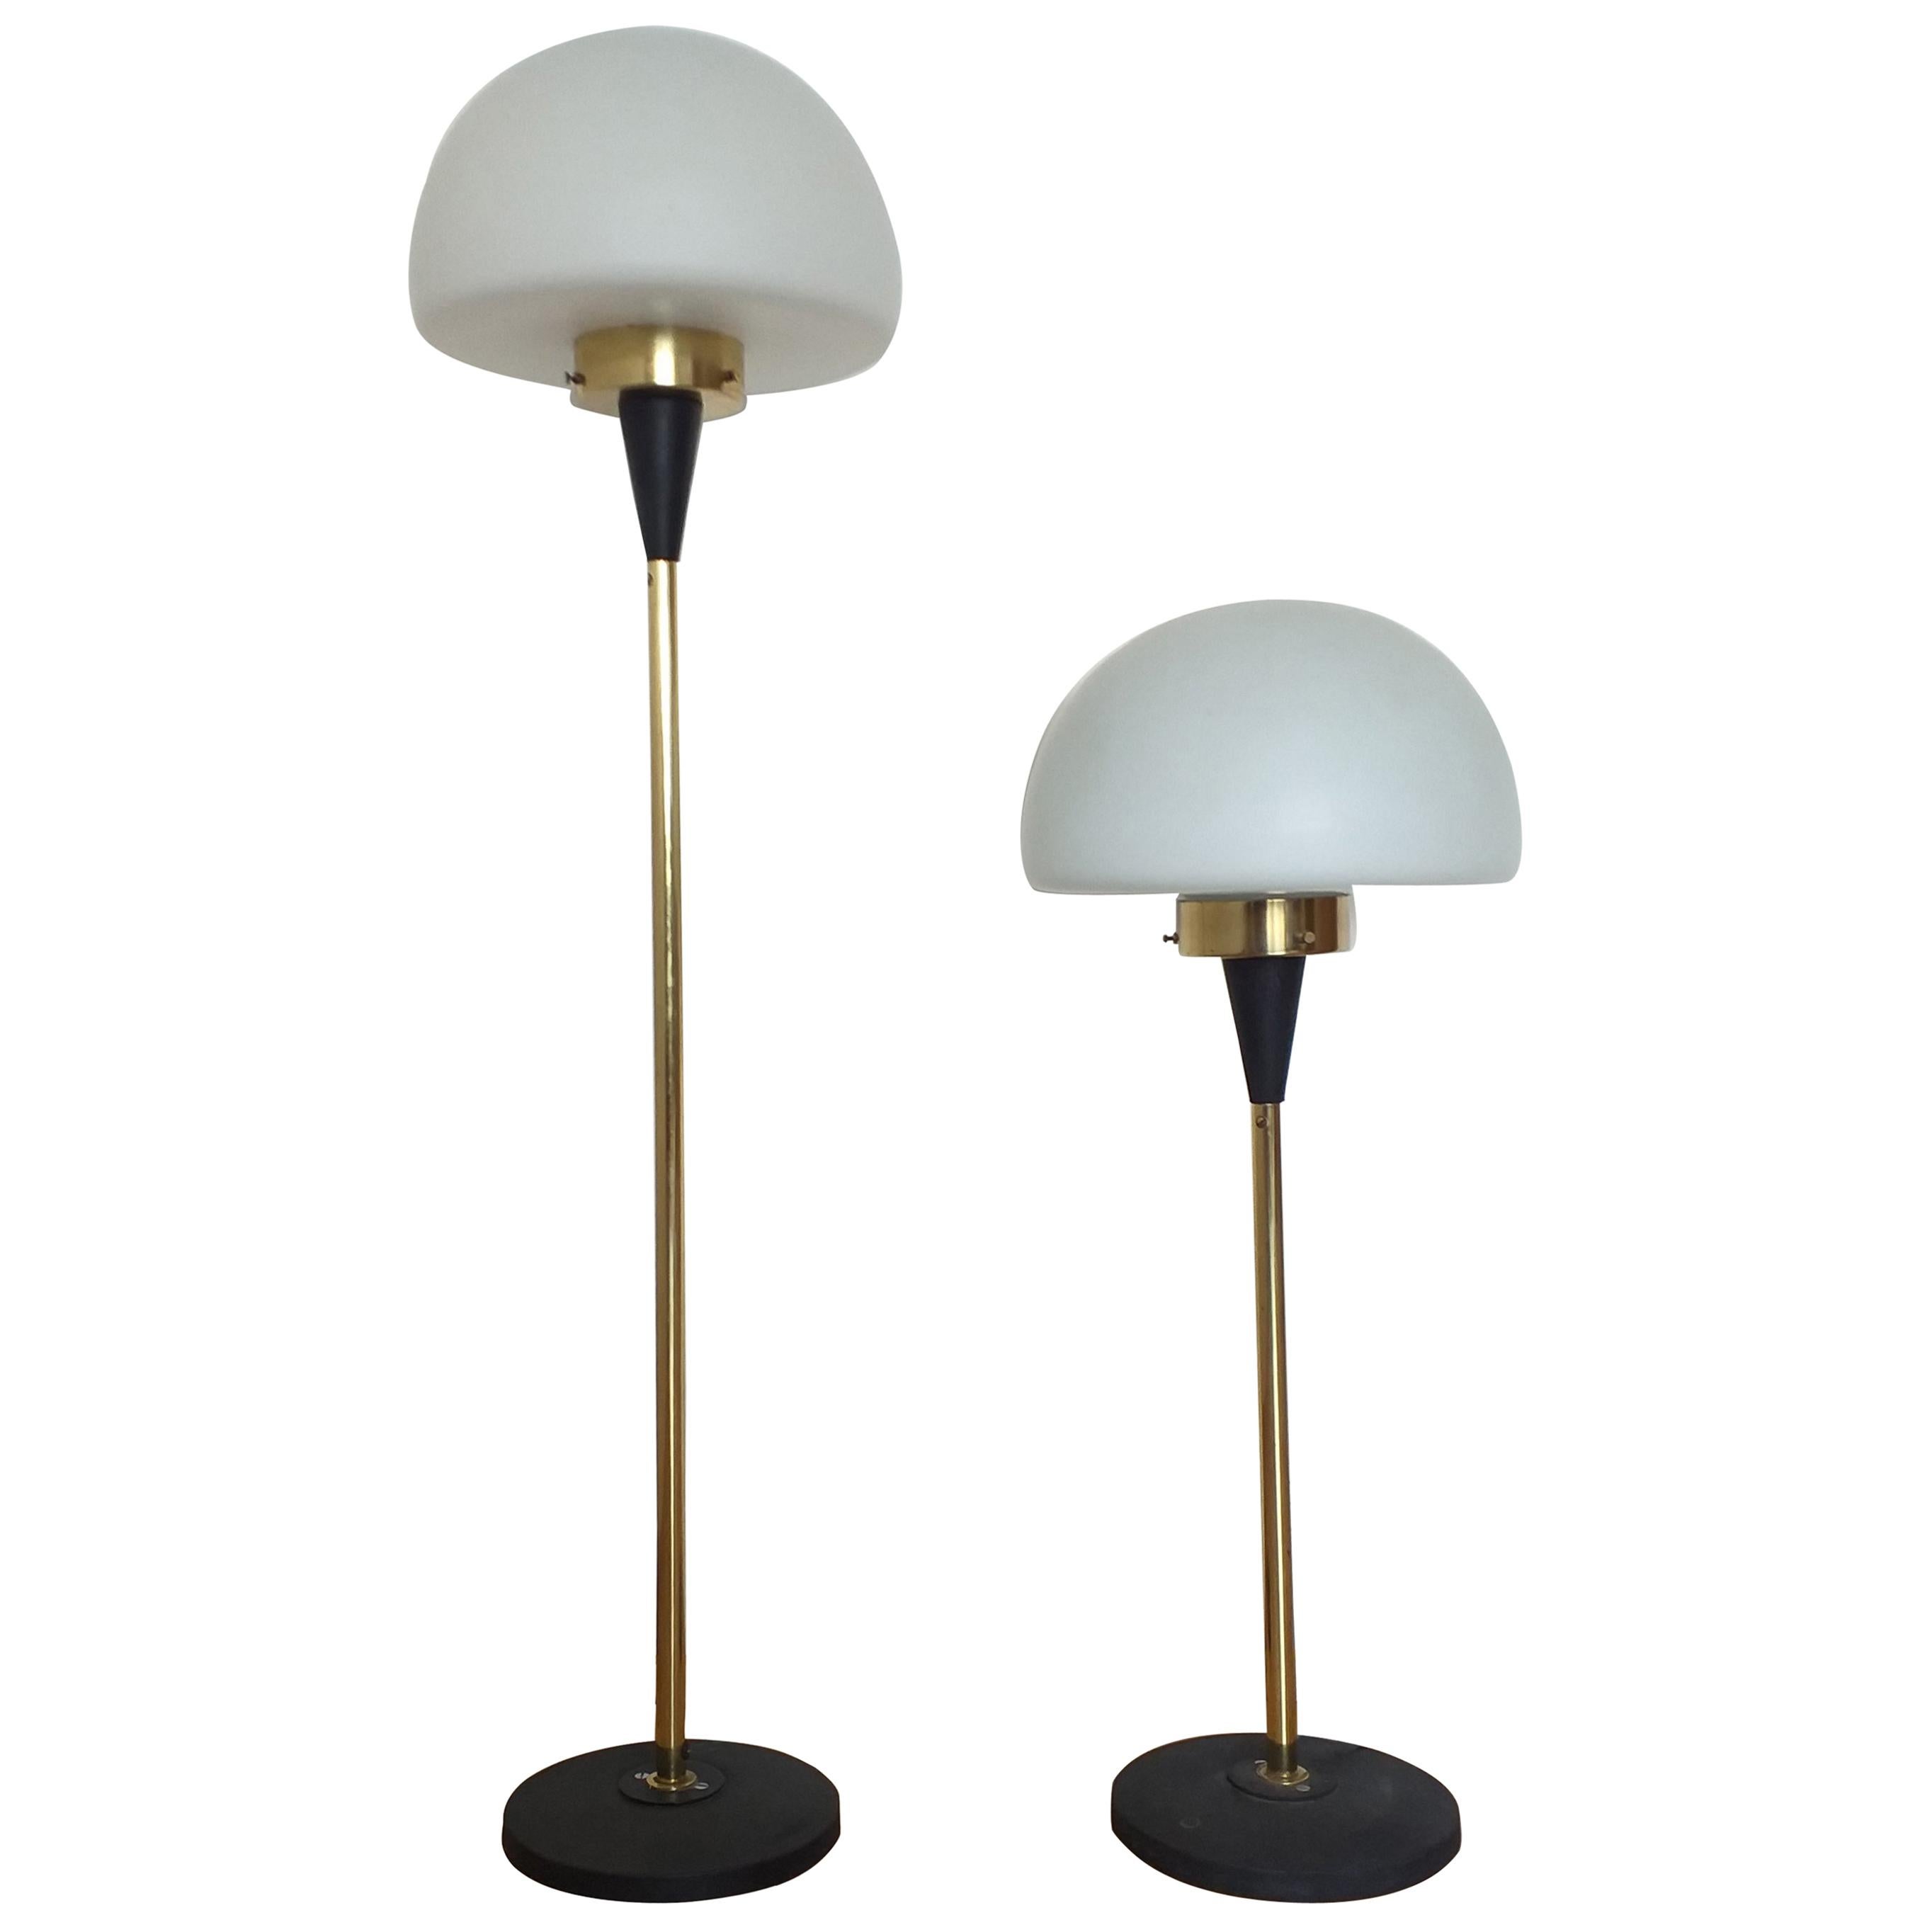 Set of Two Floor Lamps Lidokov Designed by Josef Hurka, 1970s For Sale